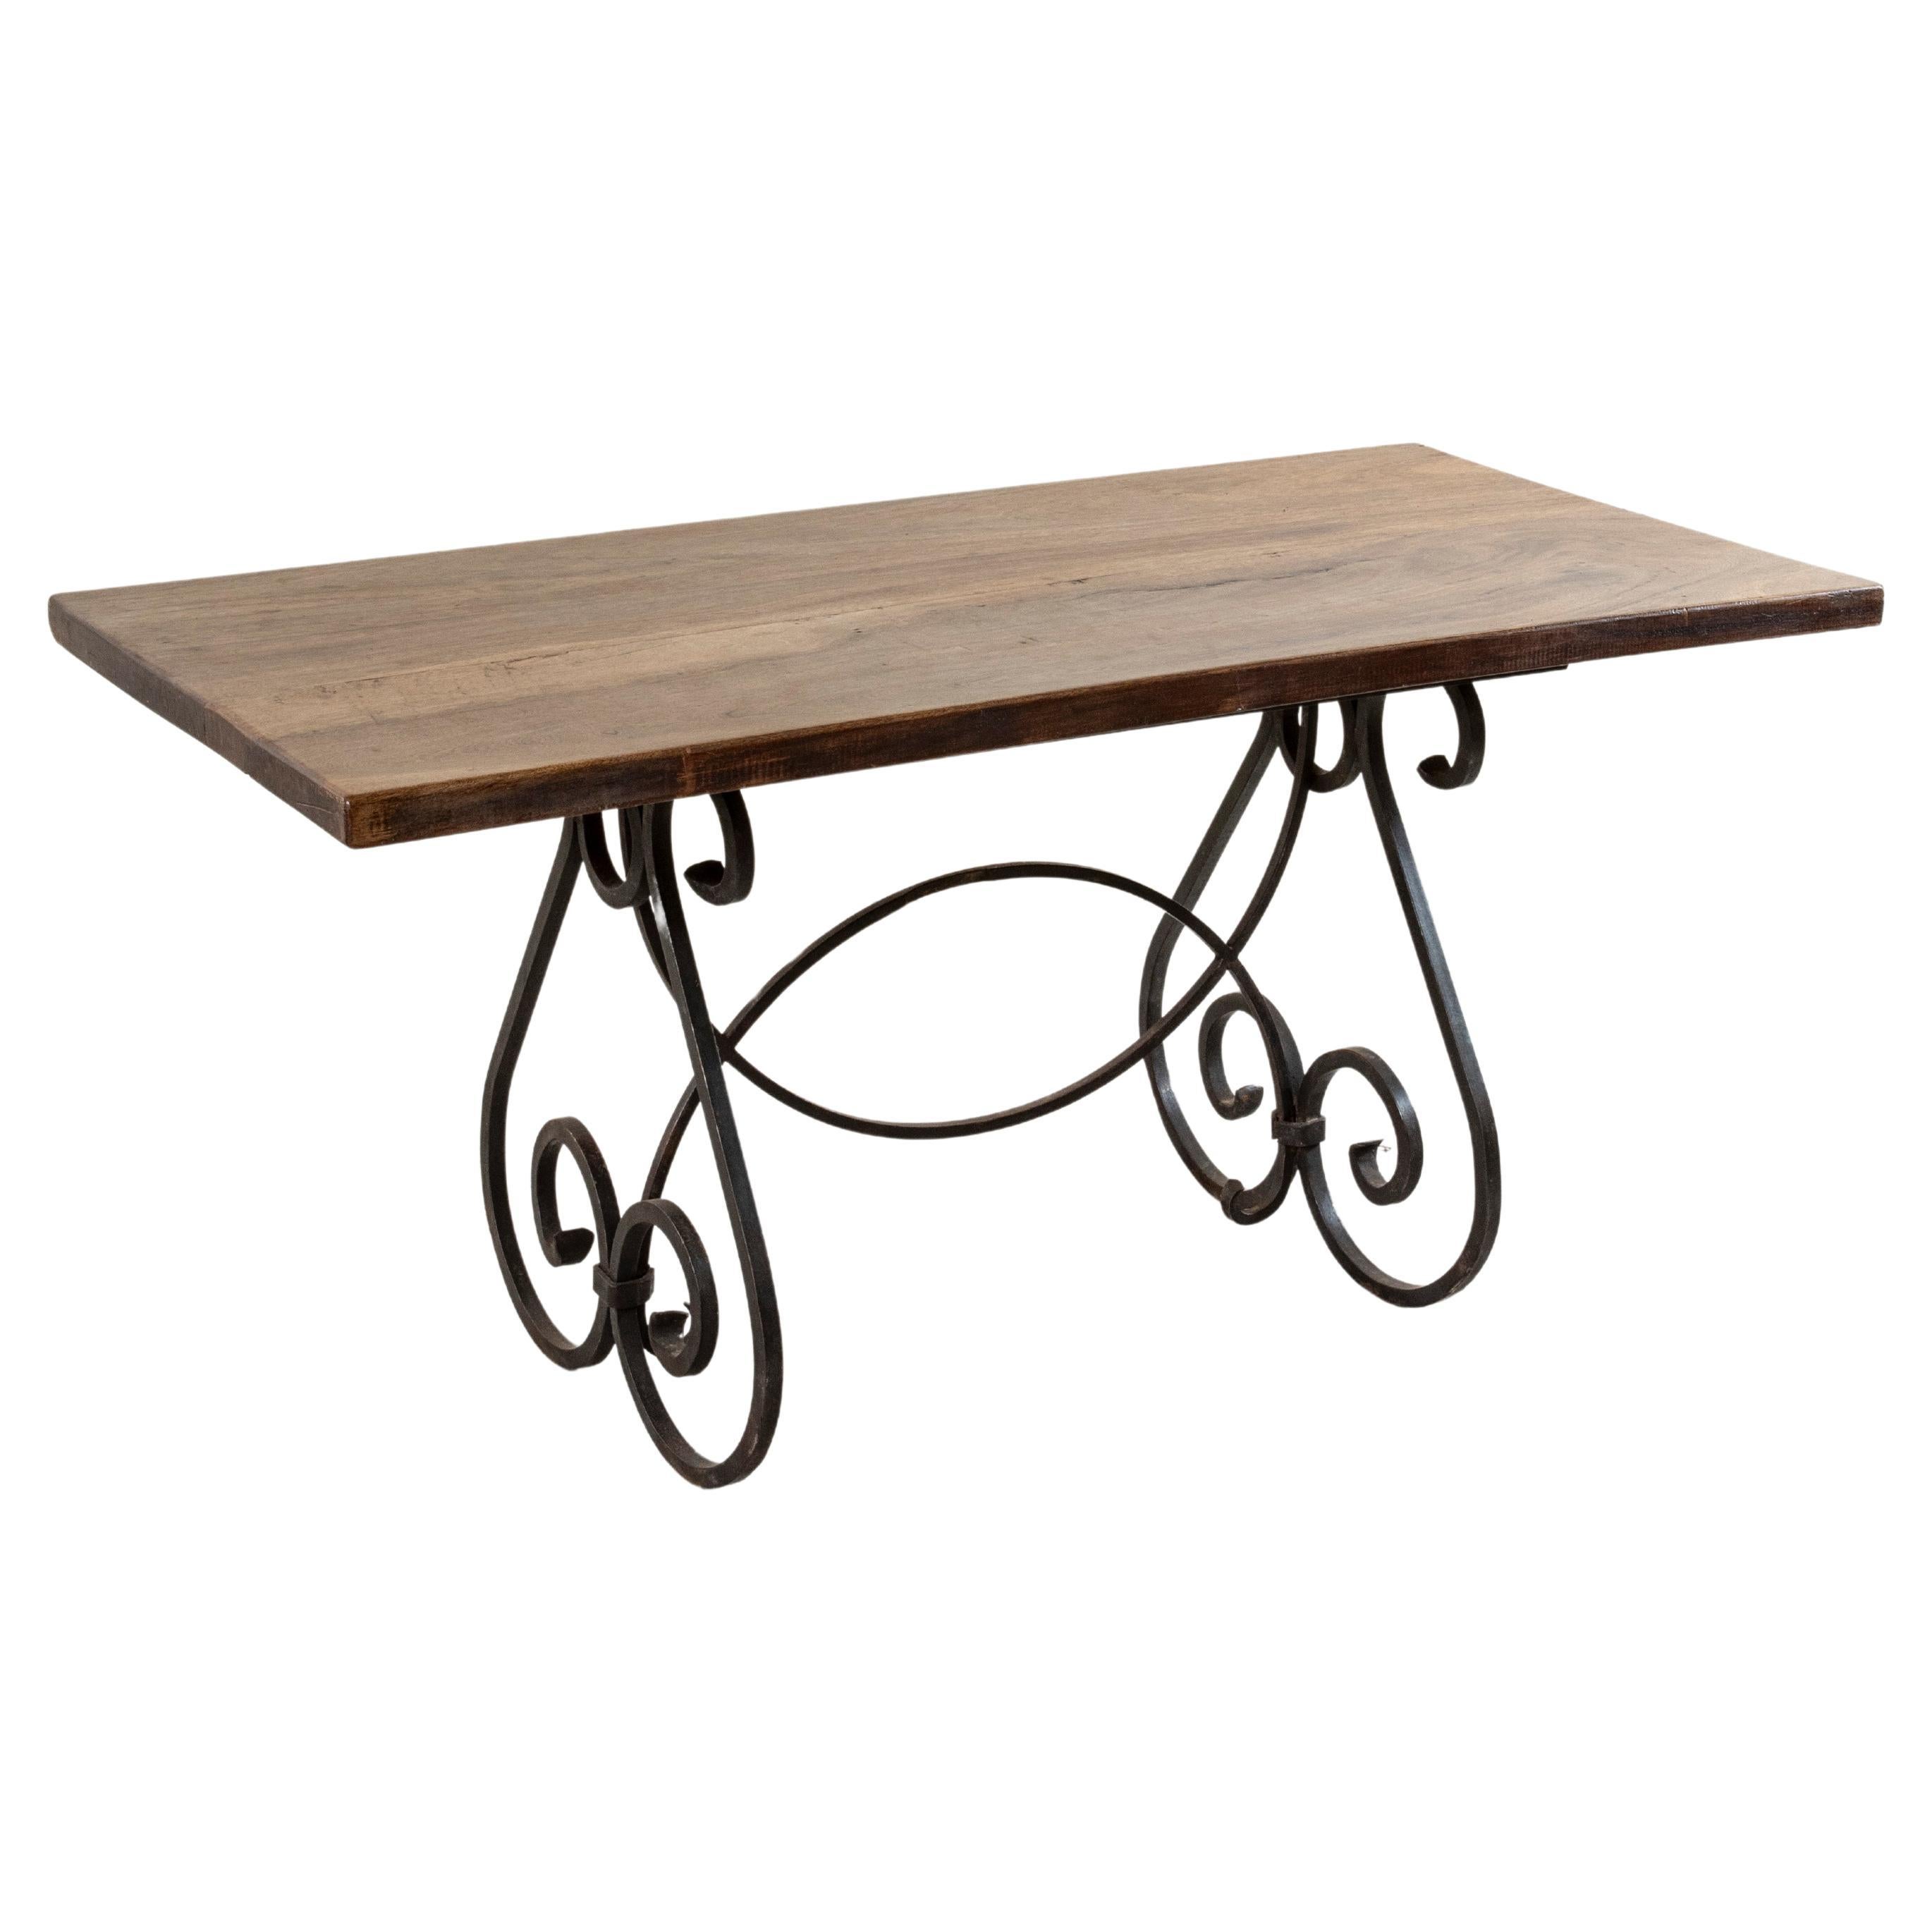 Mid-20th Century French Artisan Made Walnut and Iron Dining Table, Writing Table